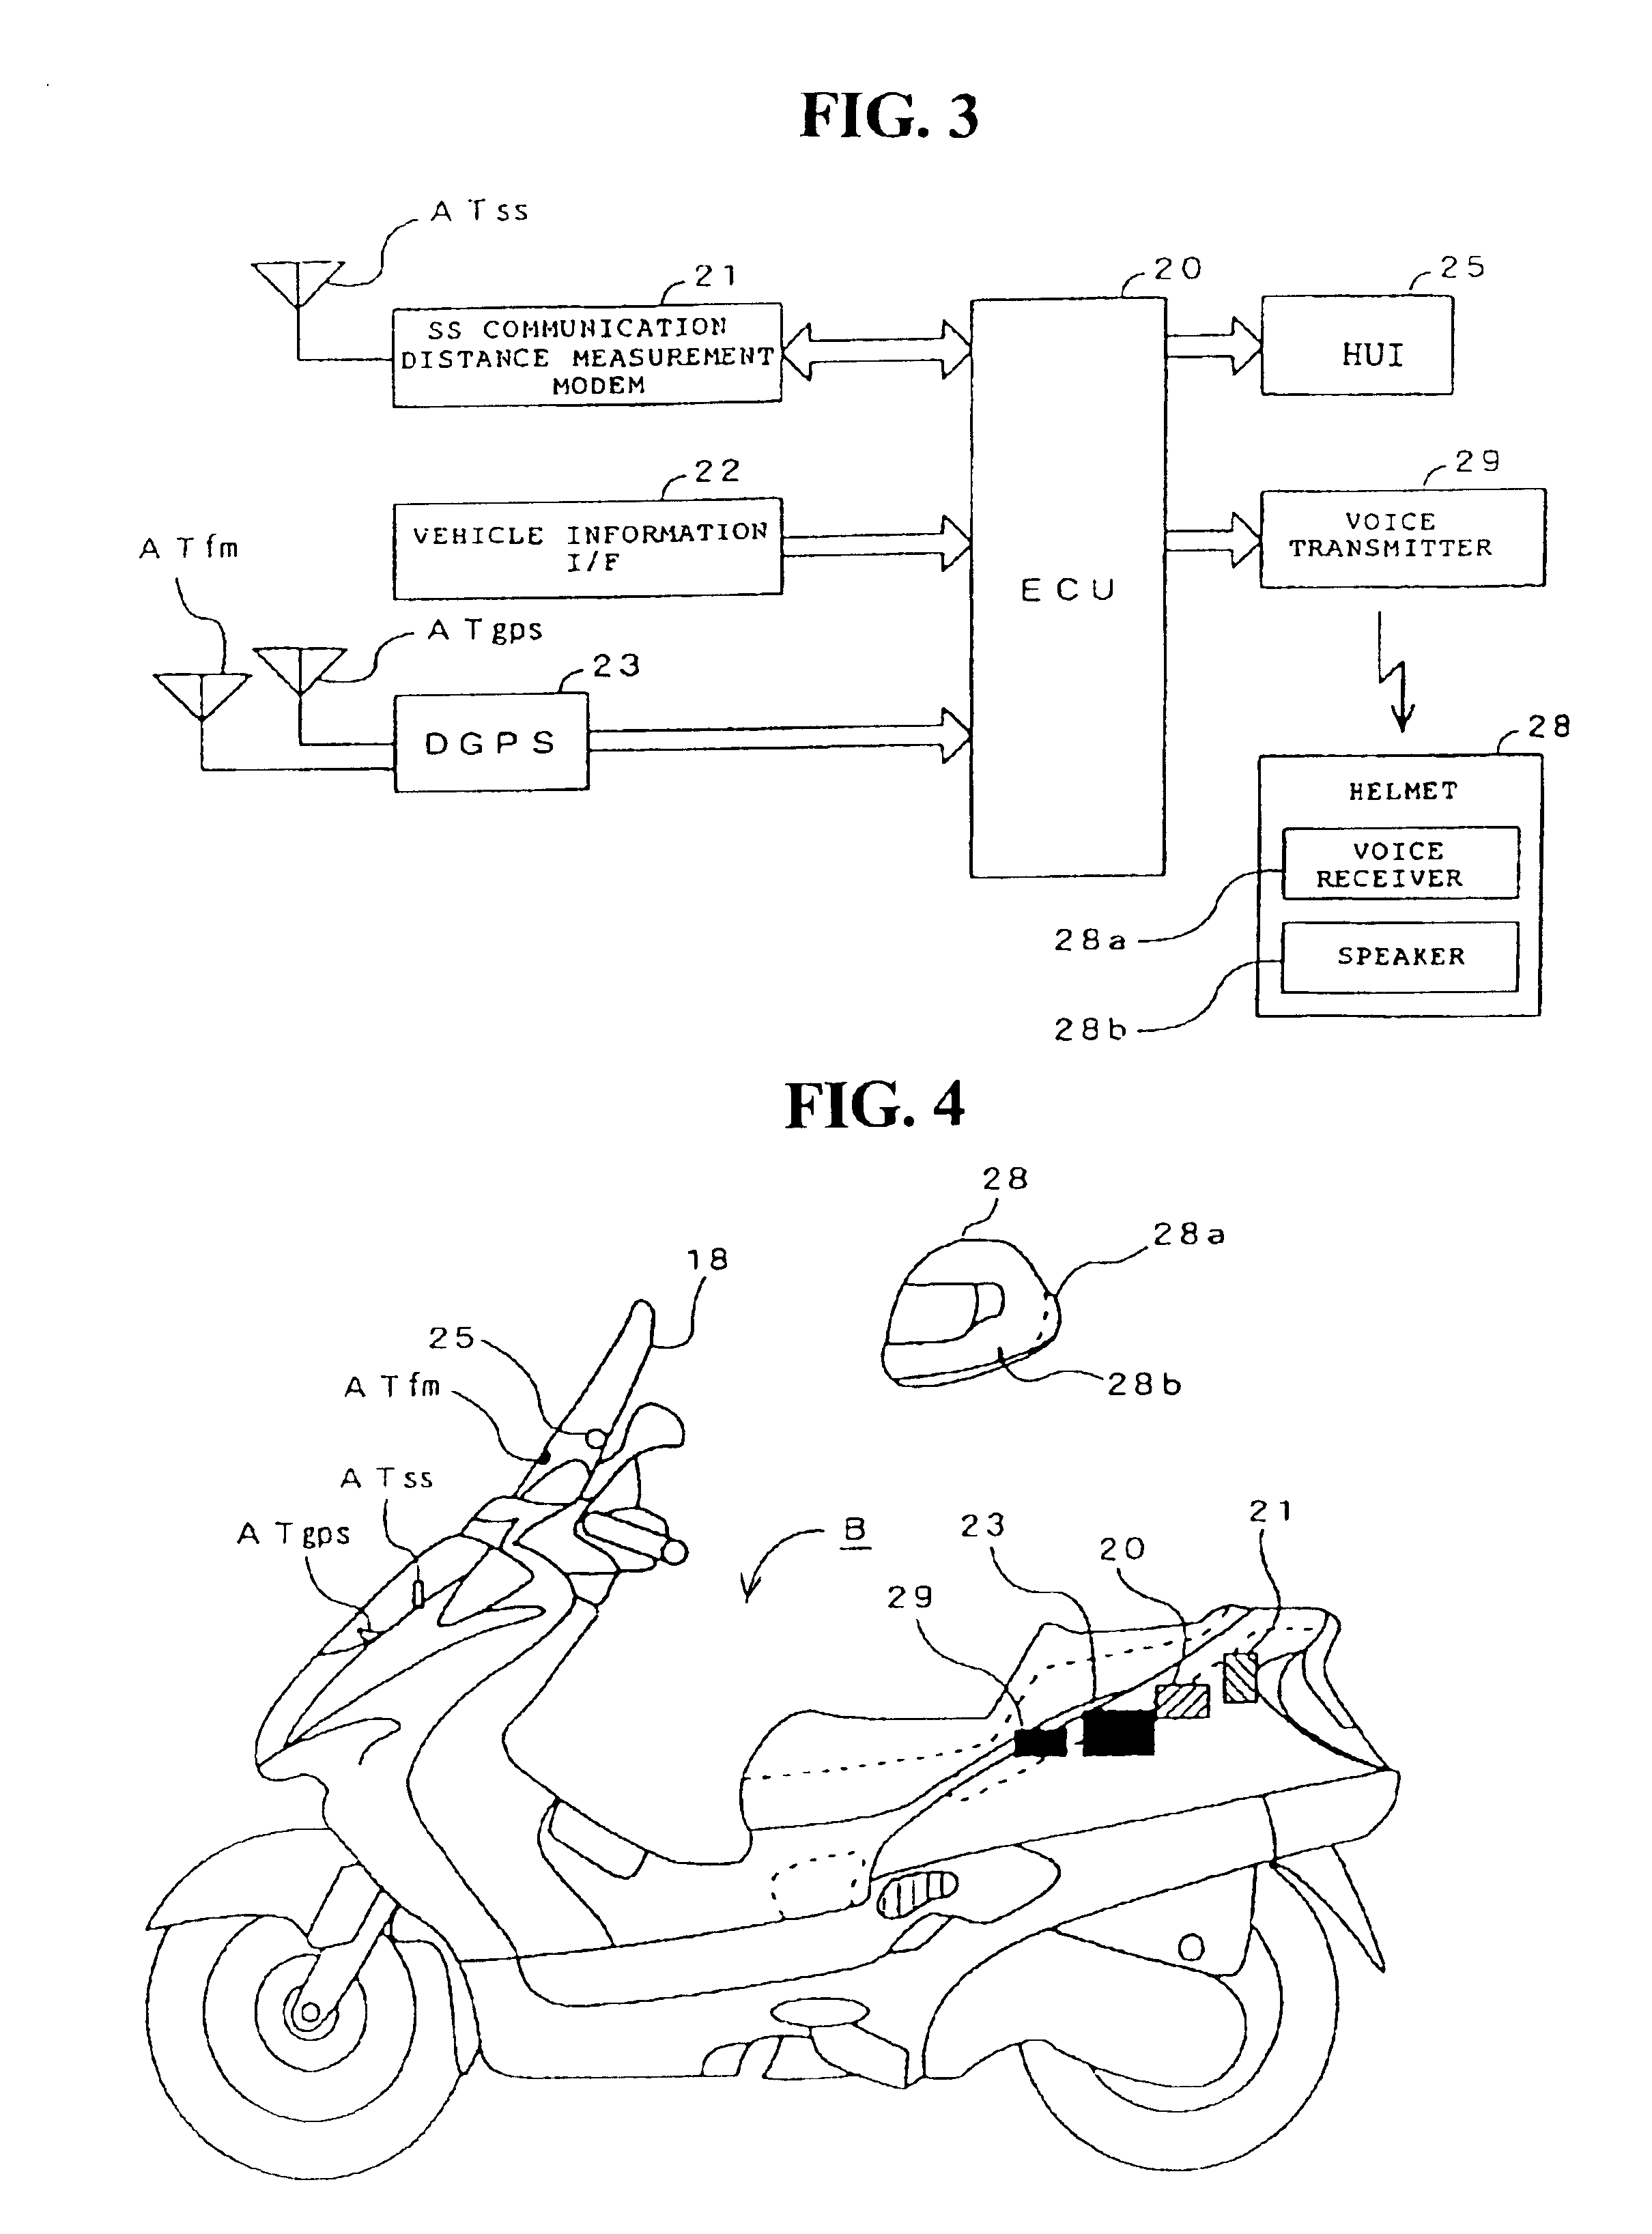 Vehicle recognition support system